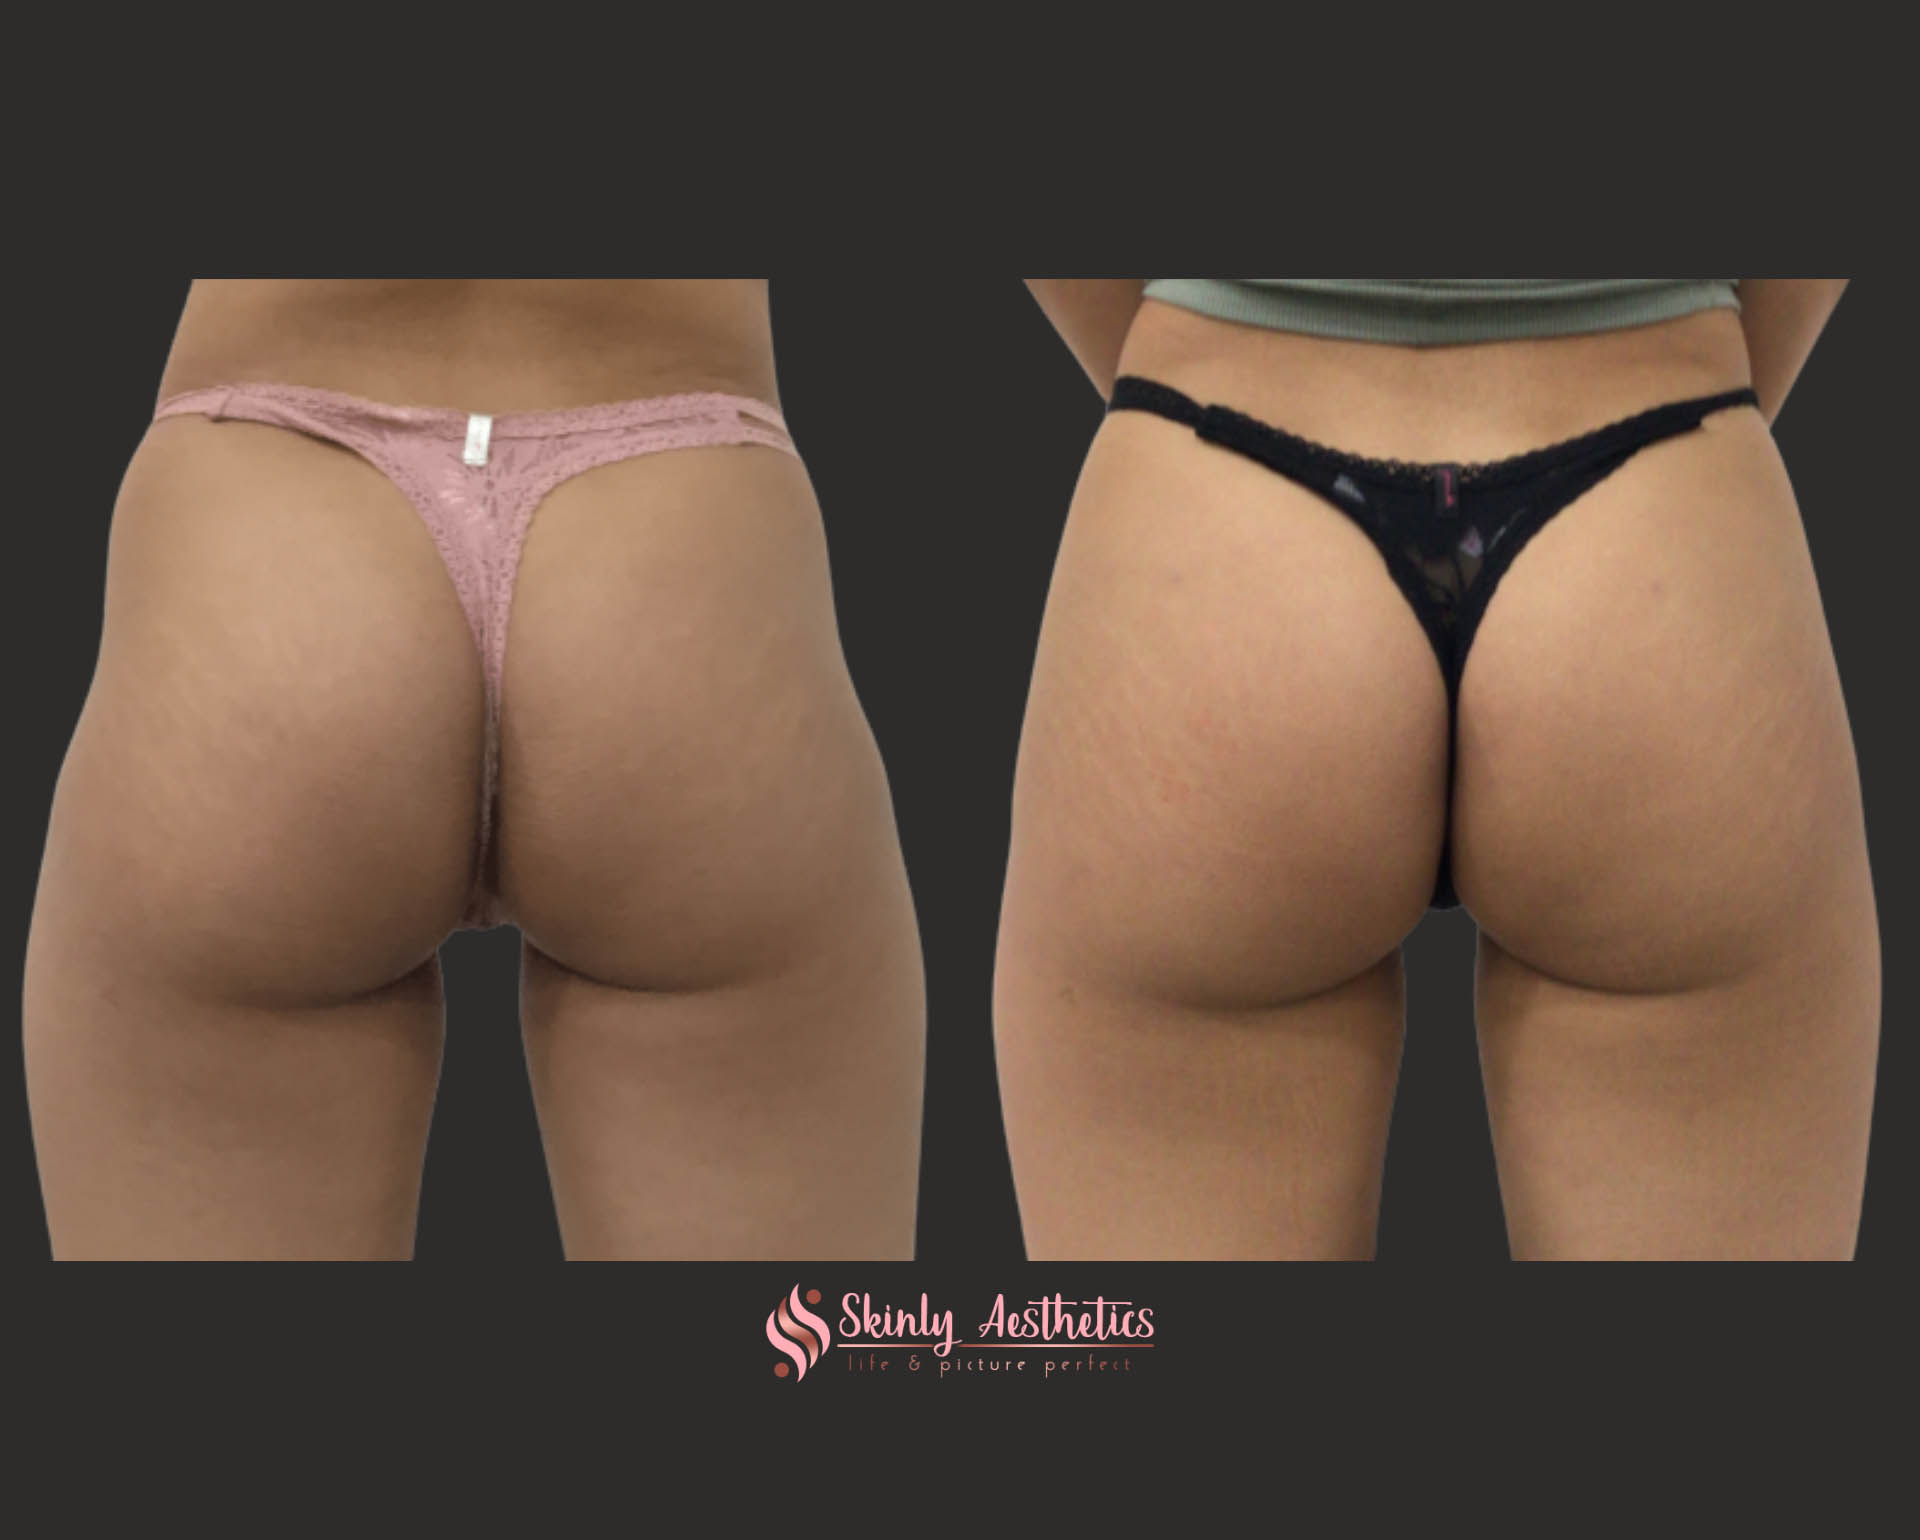 before and after butt lift results following 4 vials of Sculptra filler injections